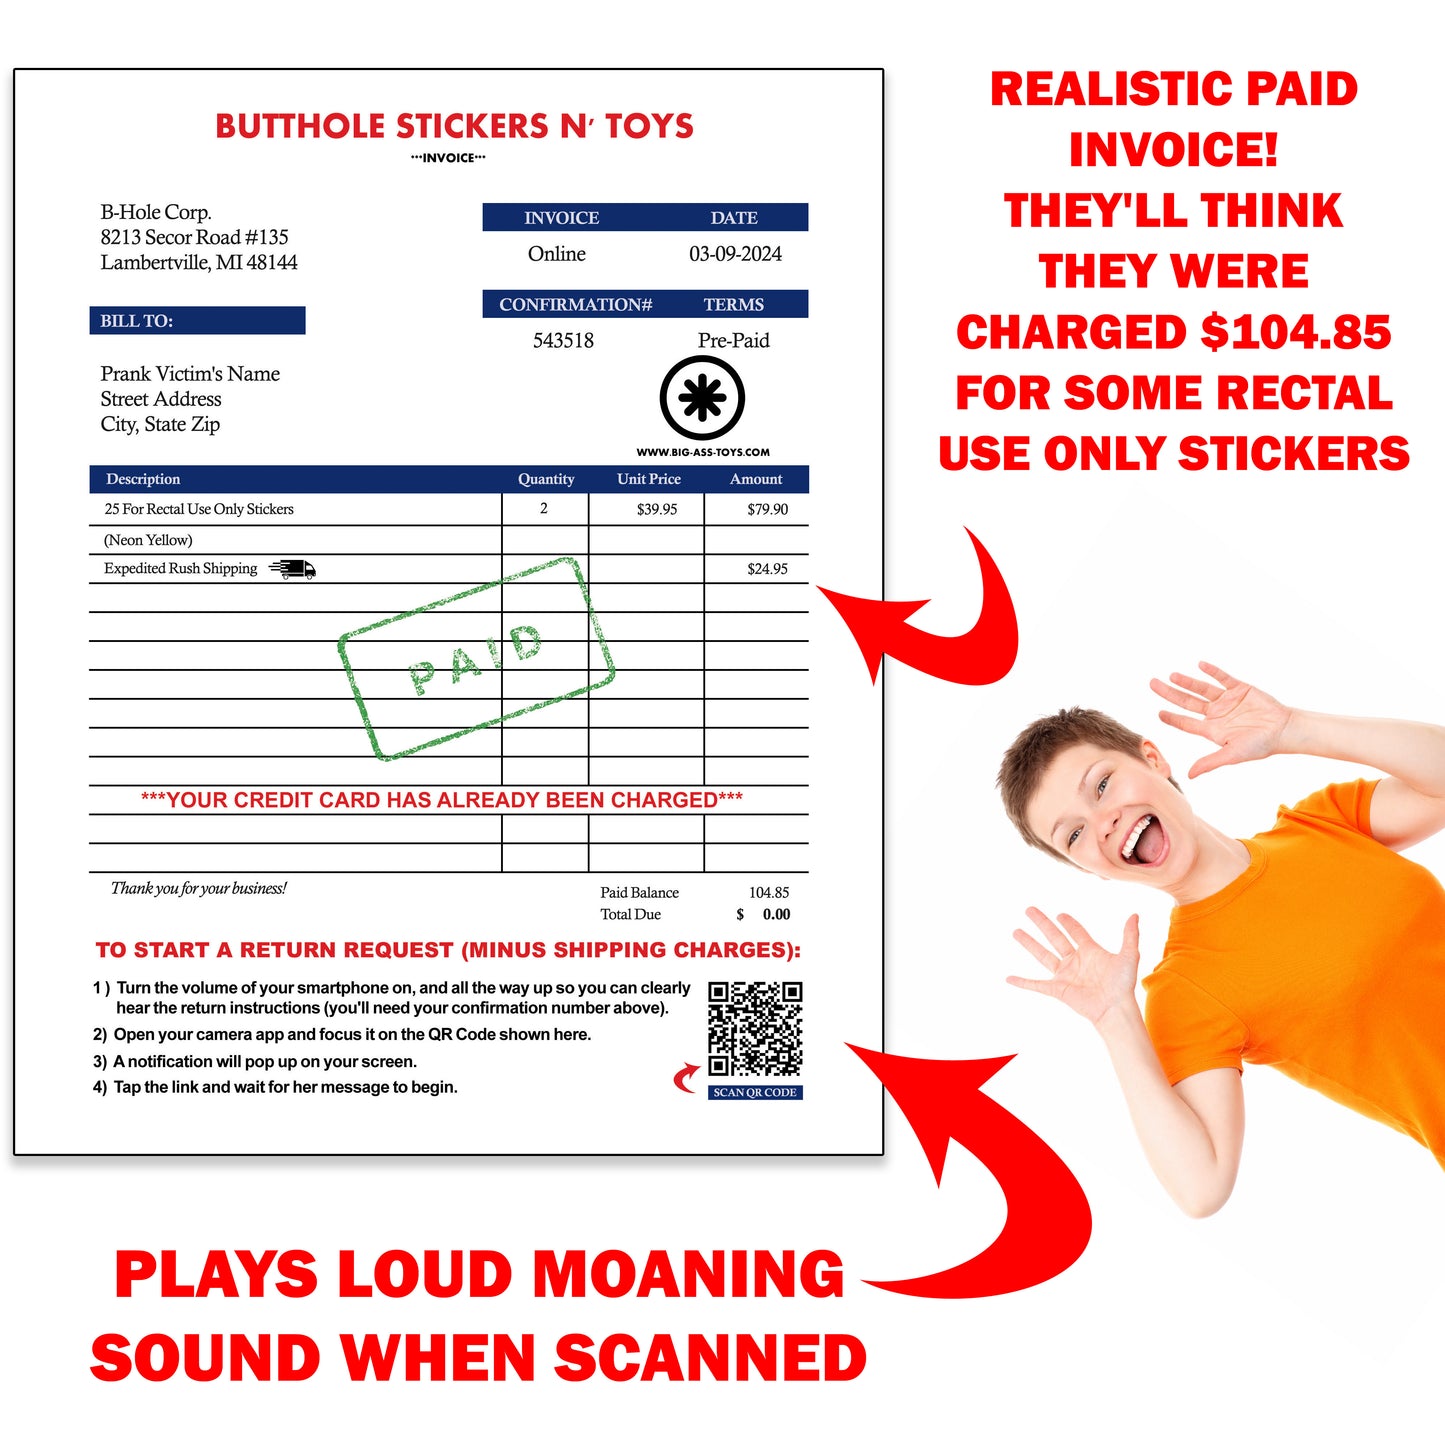 For Rectal Use Only Stickers Mail Prank; 4 Pranks in 1